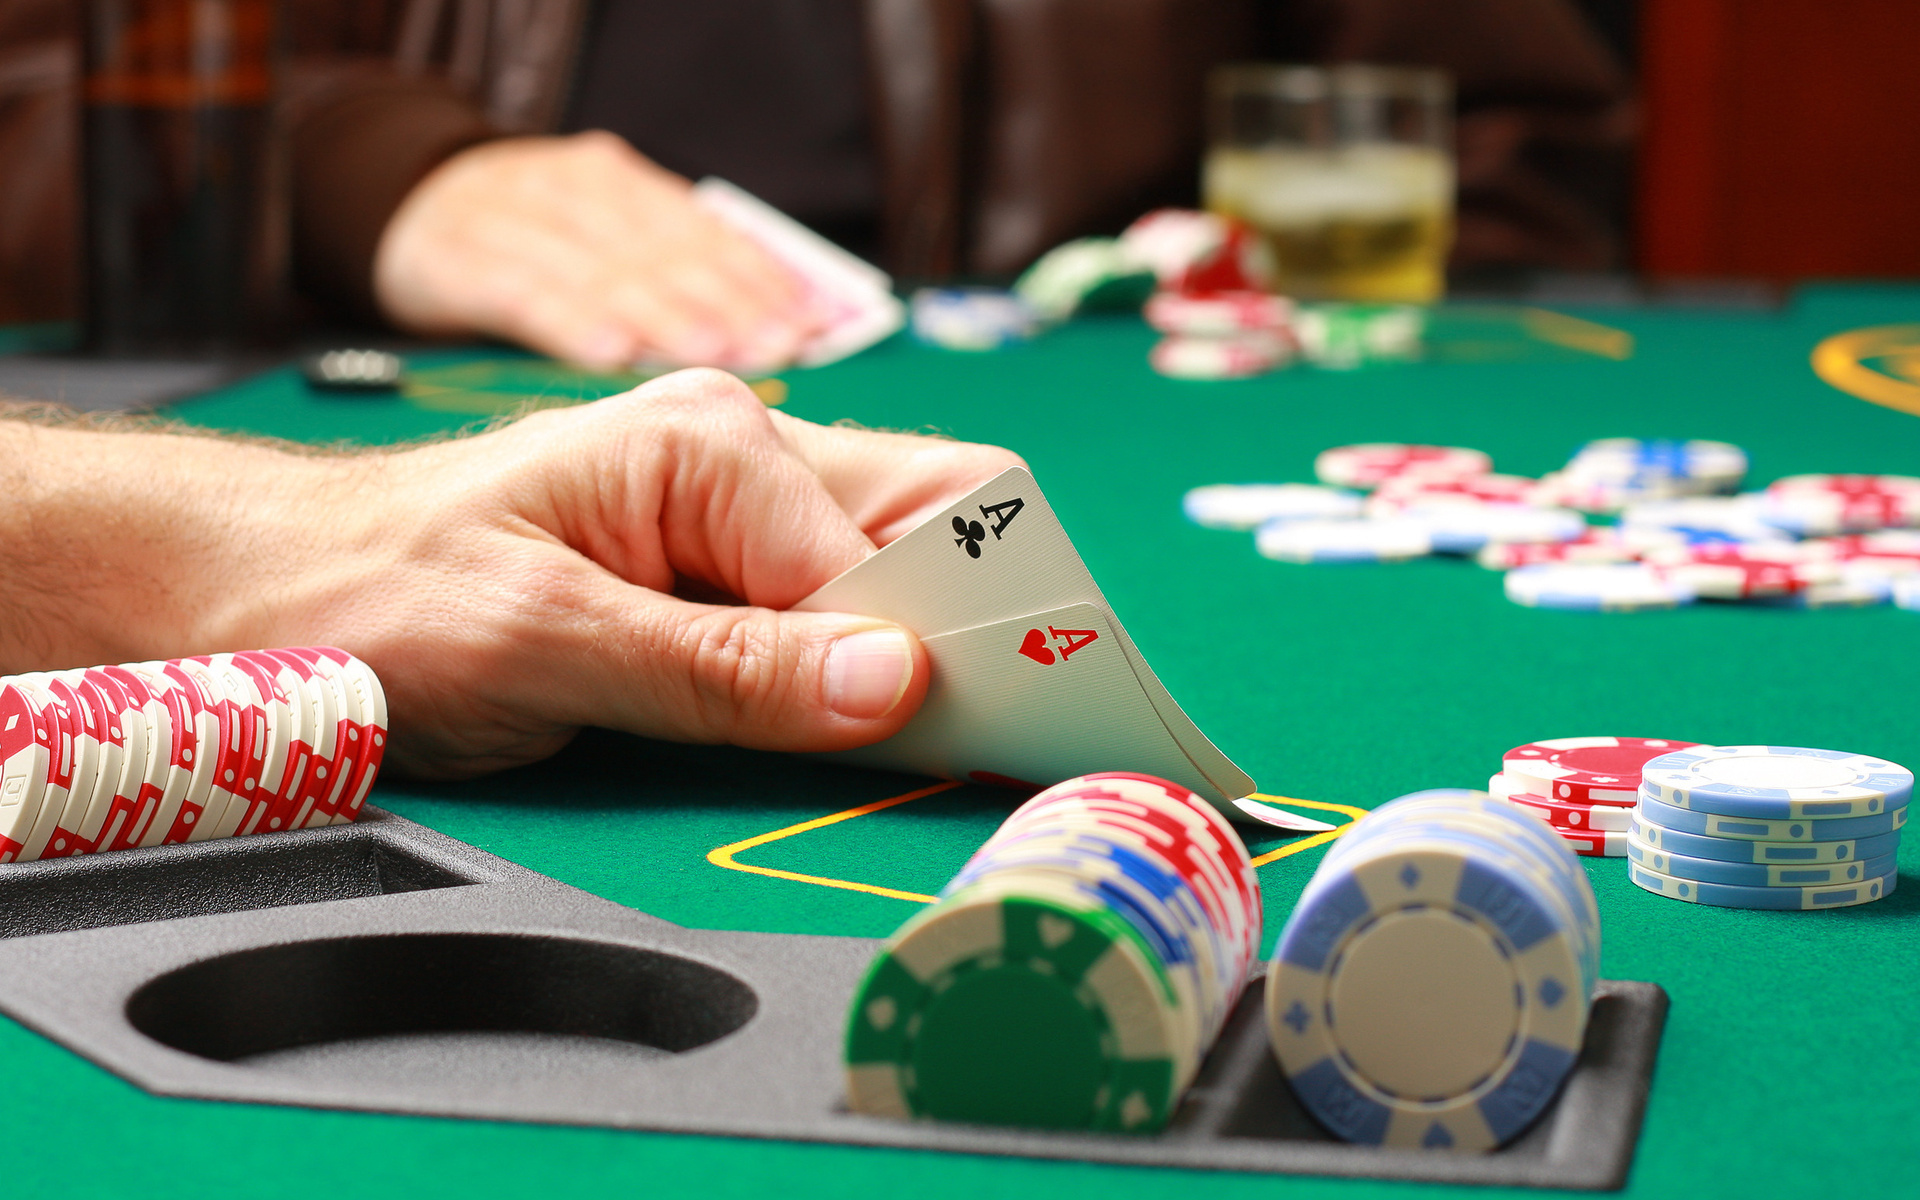 Poker: Higher cards, AA, The best starting hand, Pre-flop in games. 1920x1200 HD Wallpaper.